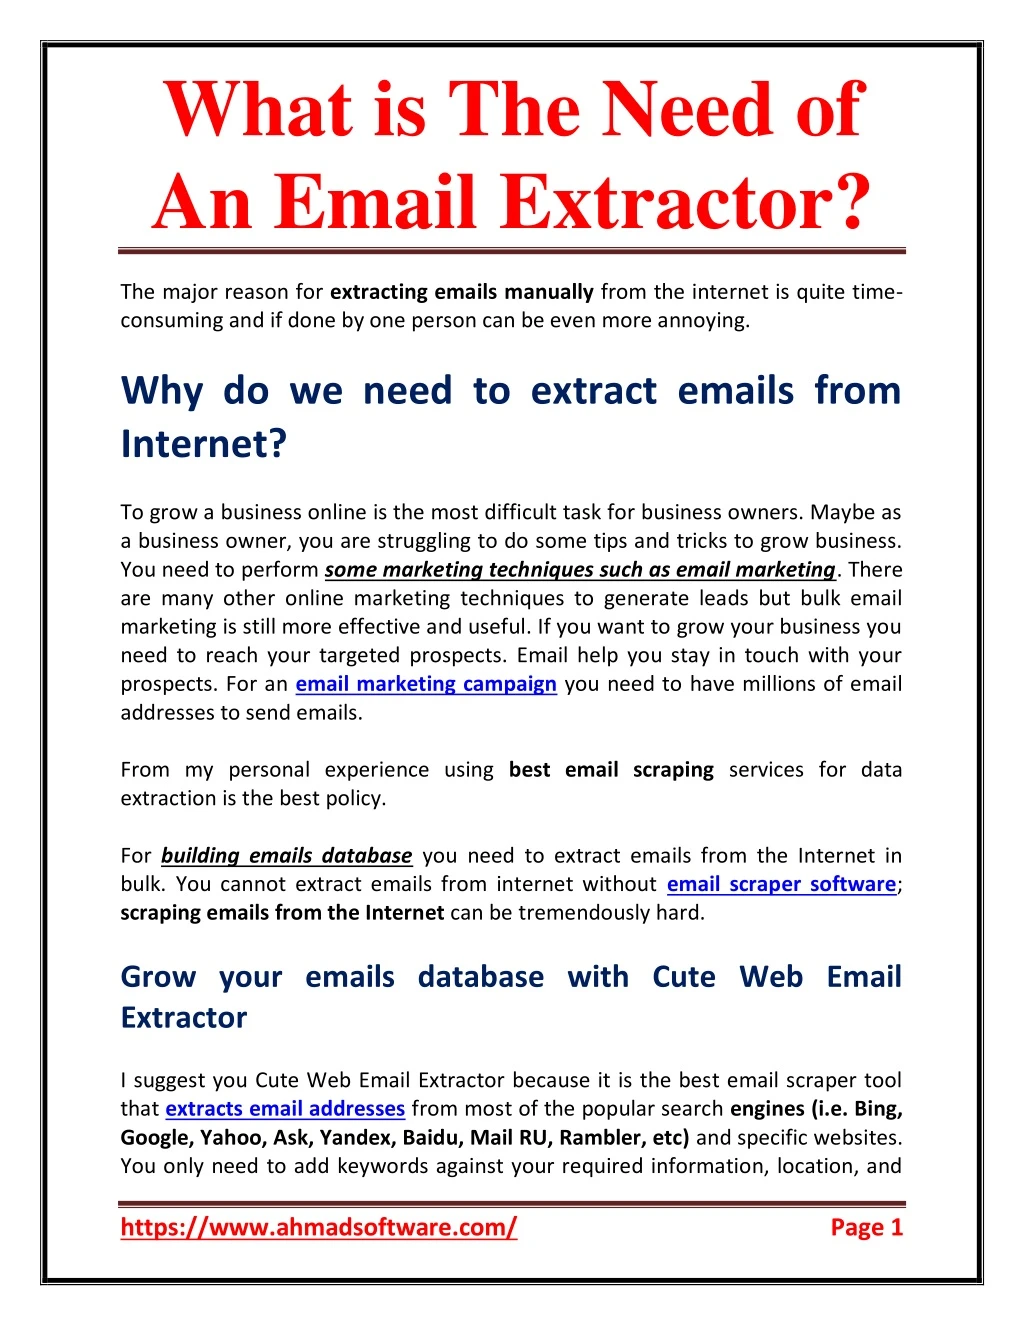 what is the need of an email extractor